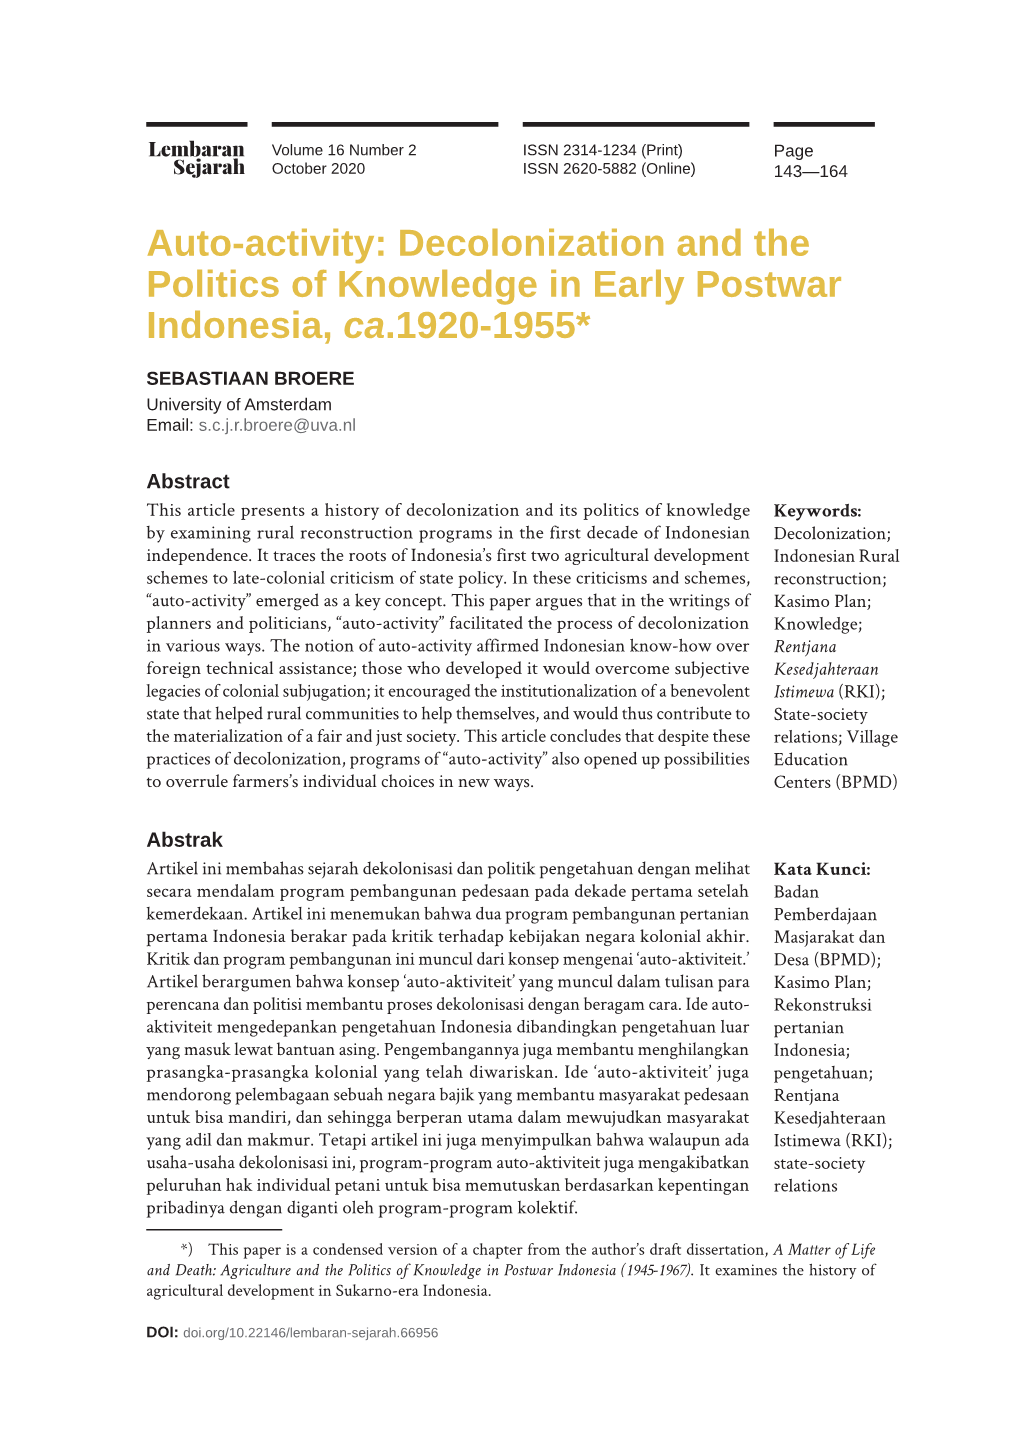 Auto-Activity: Decolonization and the Politics of Knowledge in Early Postwar Indonesia, Ca.1920-1955*